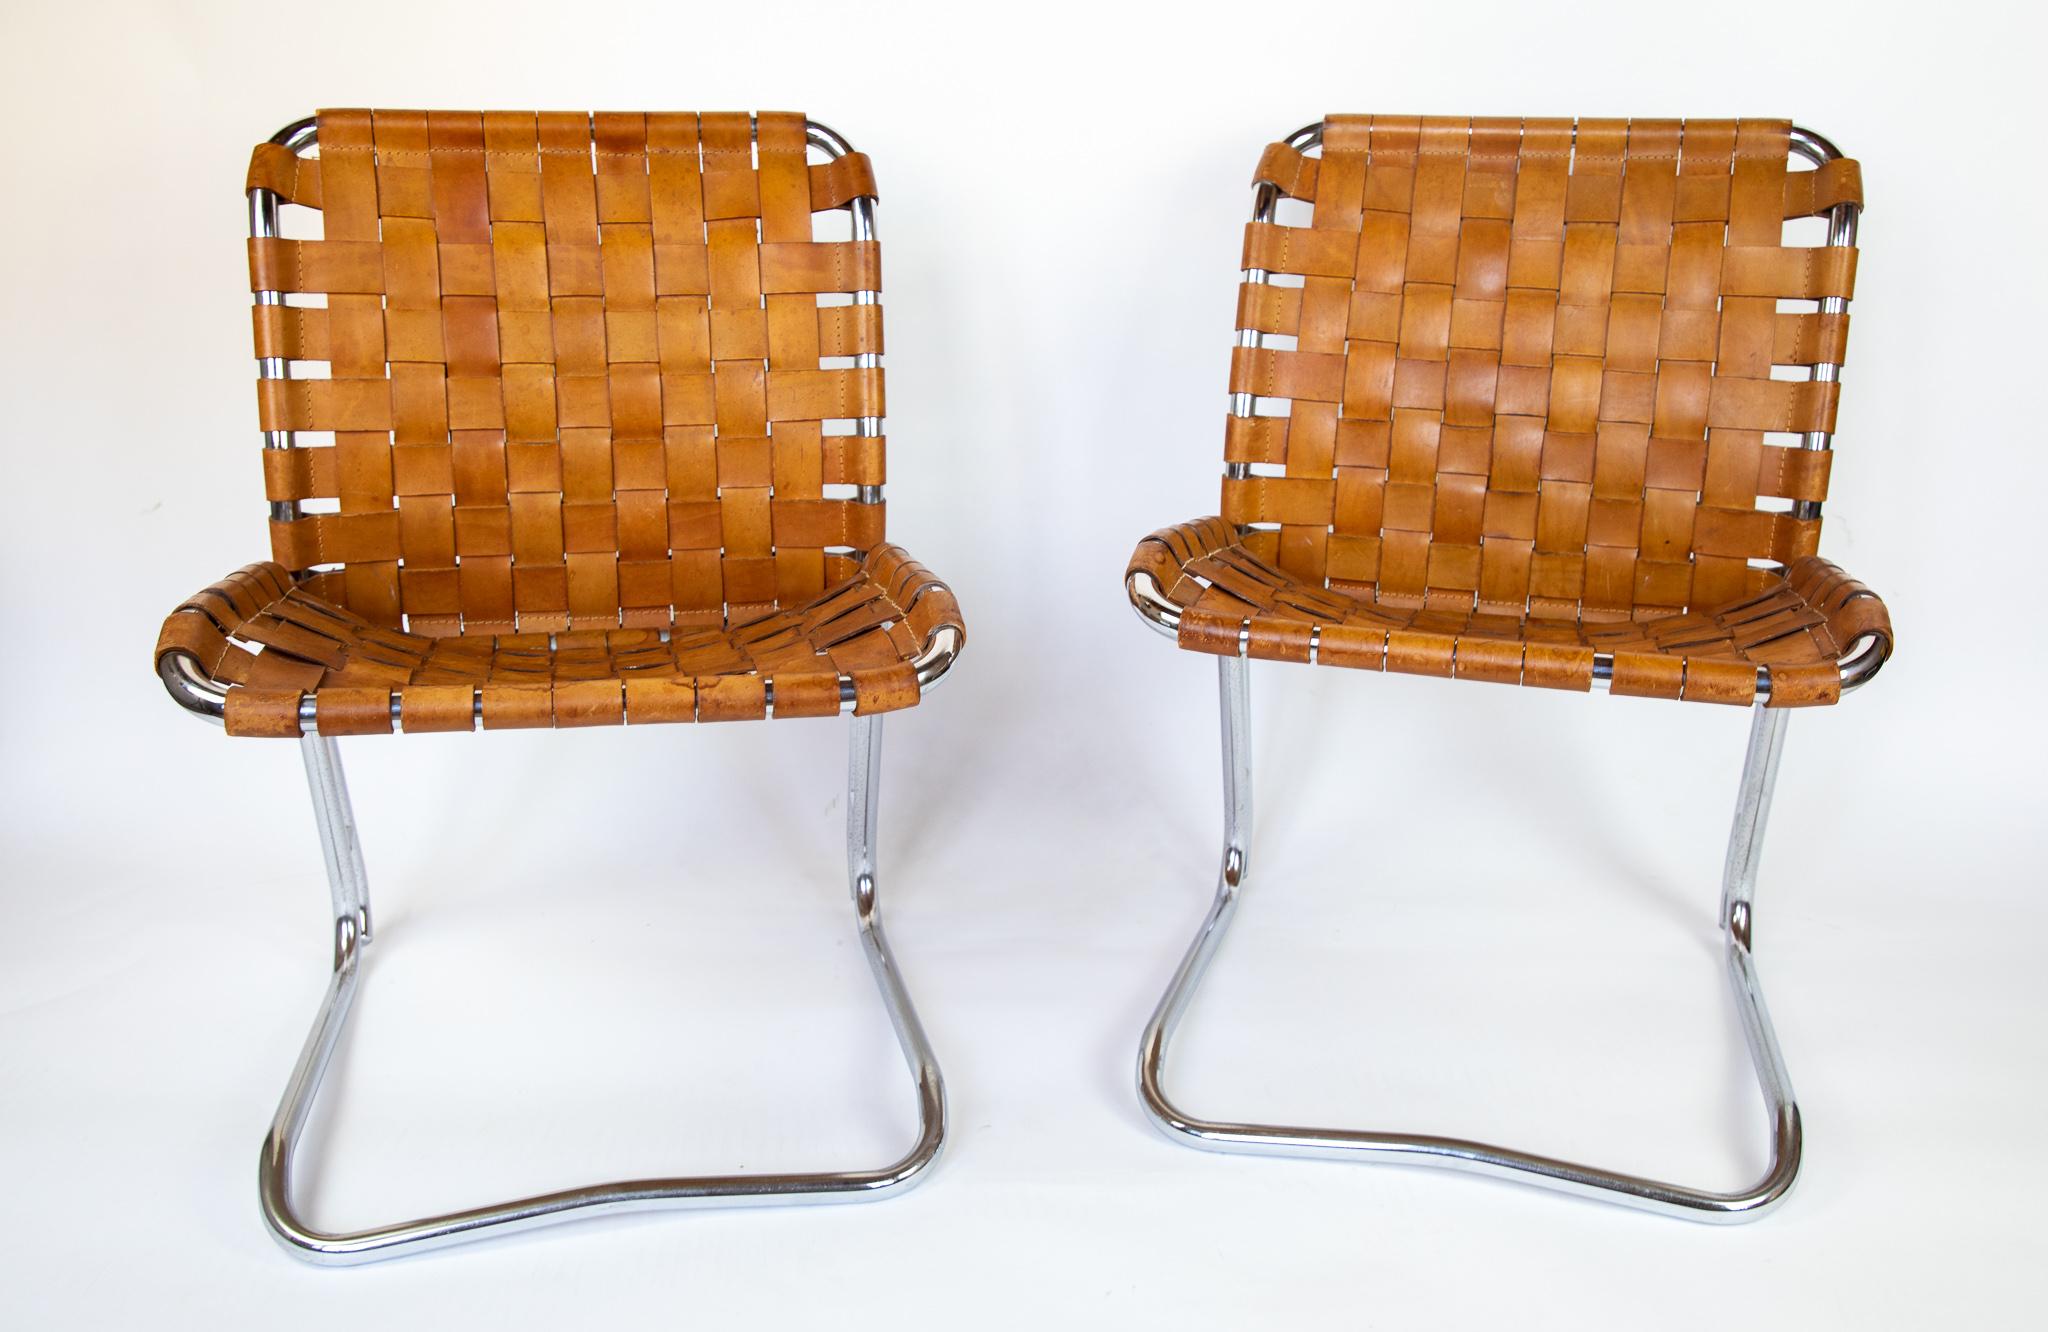 Mid Century Lounge Chairs Chrome Plated Patinated Cognac Leather, Italy, 1970s.

This very rare pair of cognac lounge chairs are made of chrome plated solid metal frames with amazing patinated cognac saddle leather straps and because of their age